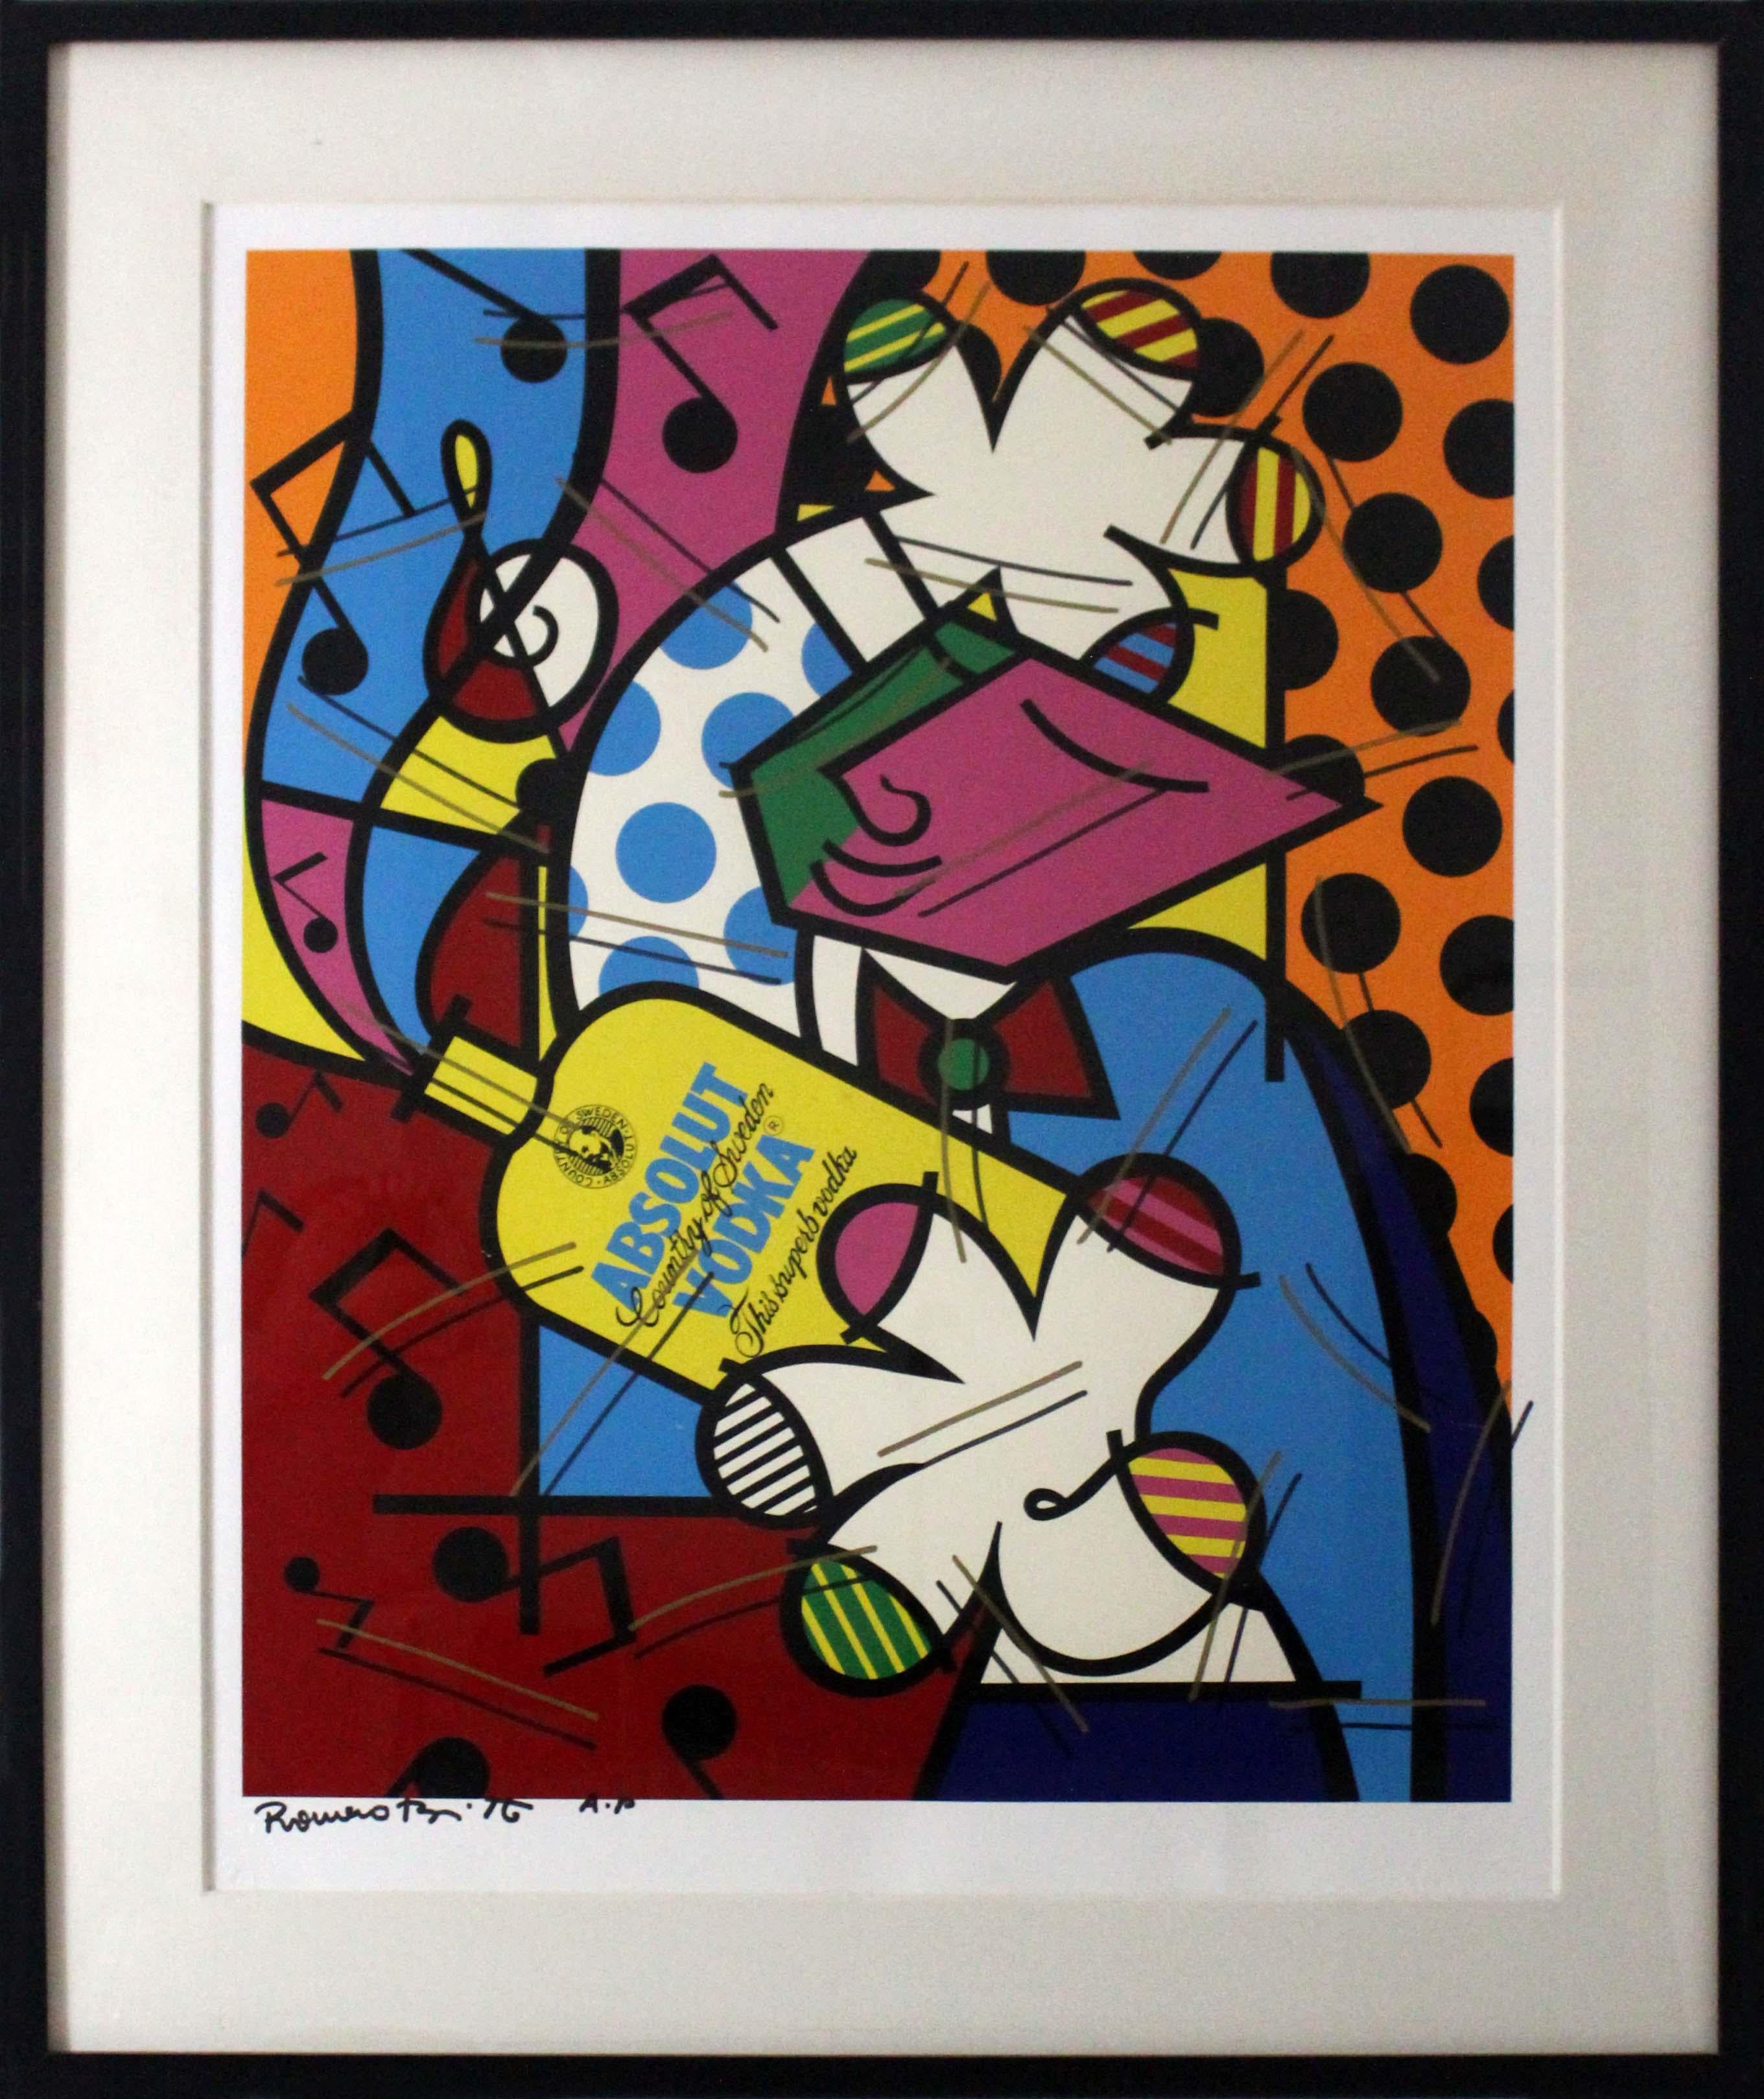 An iconic cubist pop-art serigraph titled Absolut Vodka by internationally known artist Romero Britto. Hand-signed on the bottom left, with an AP annotation, and an official Romero Britto embossed seal. This lot also includes the painted Absolut